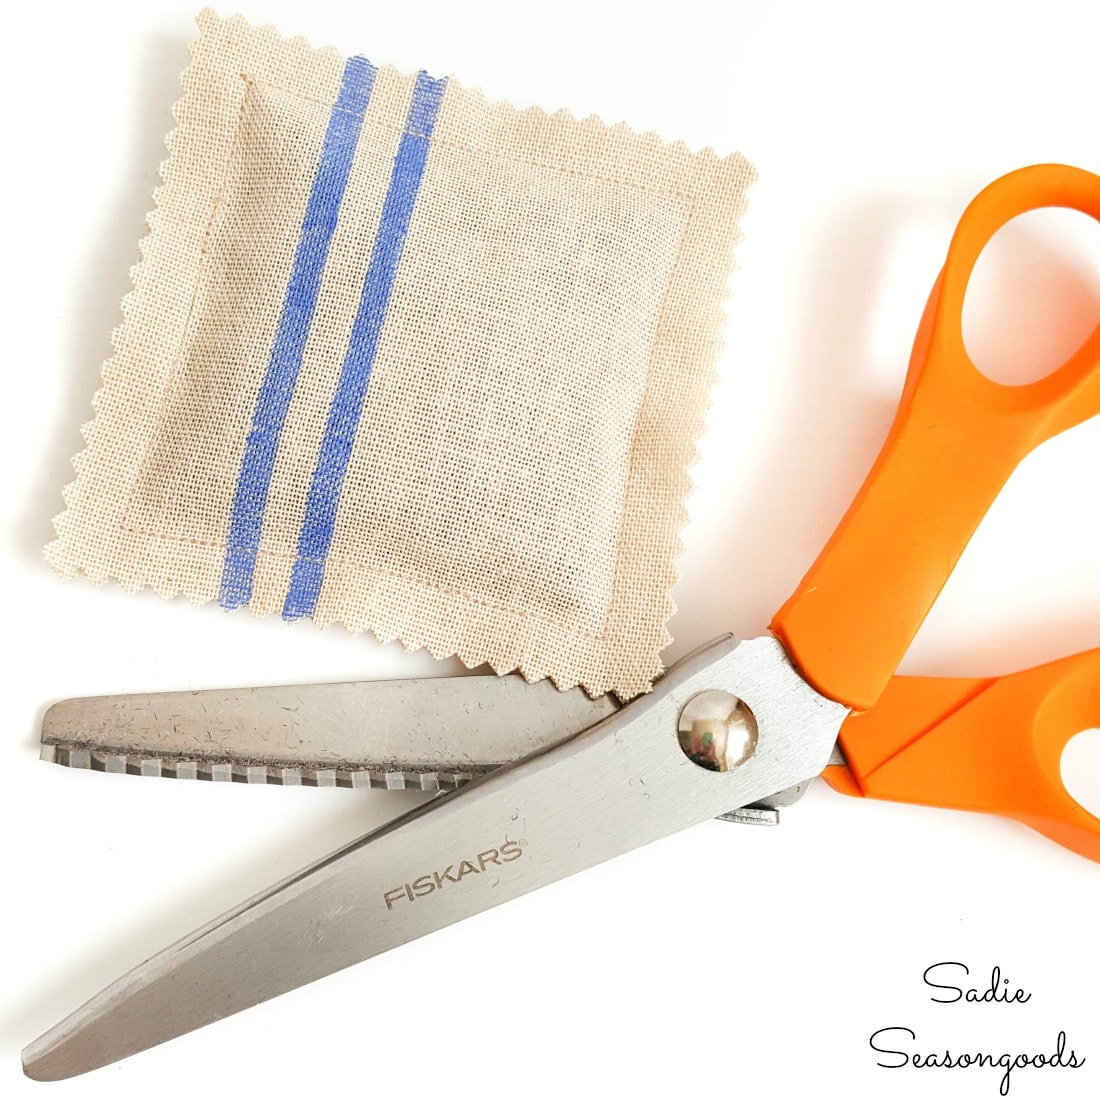 Pinking shears on the edges of DIY lavender sachets